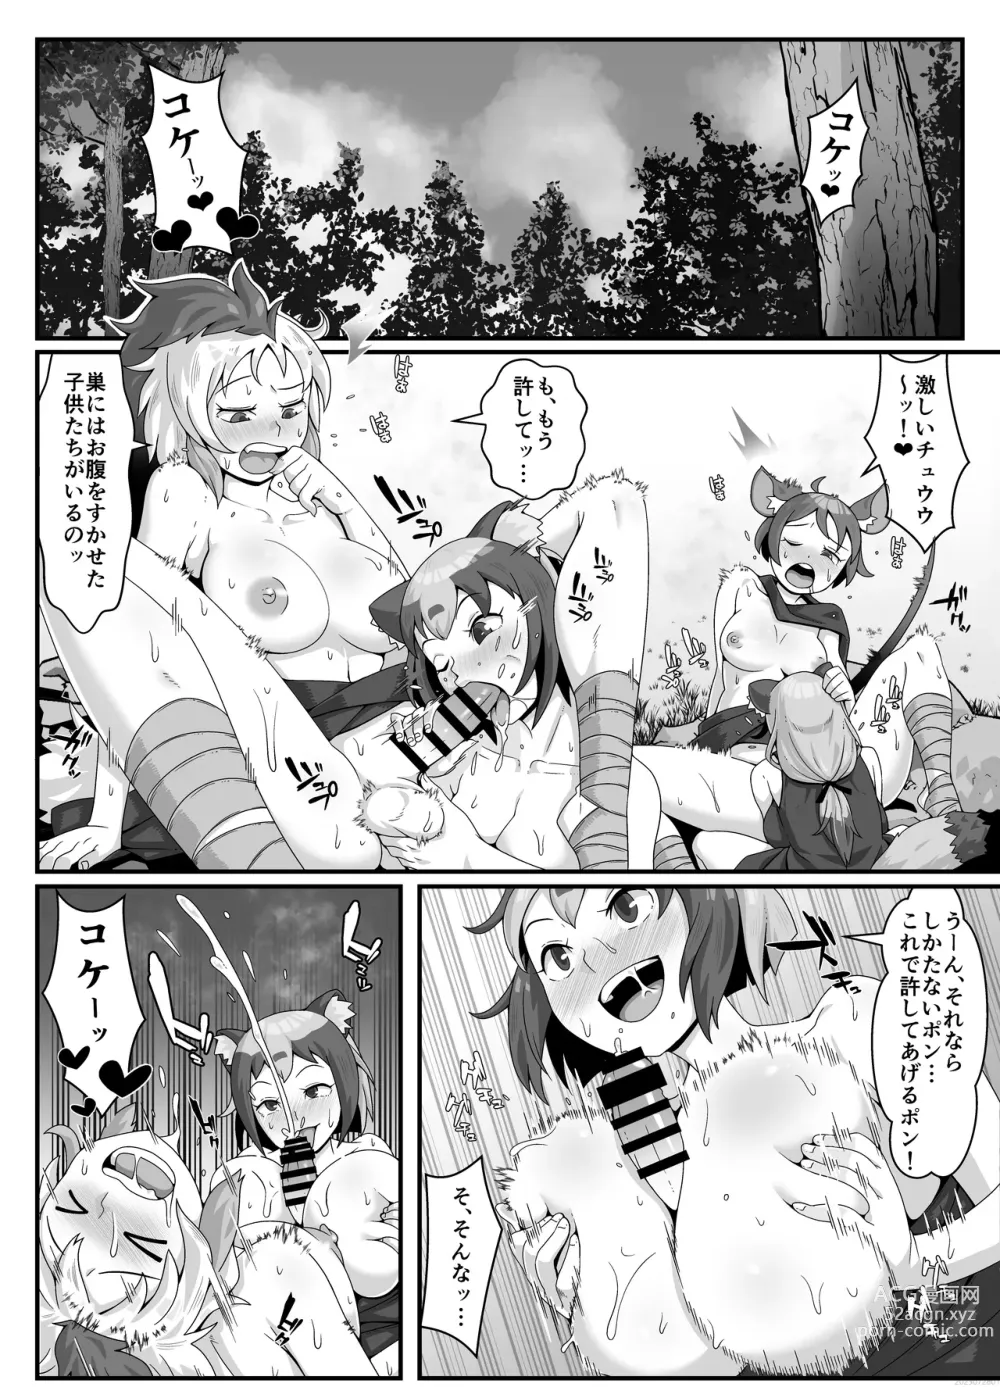 Page 2 of doujinshi FUTACOLO CO SIDE STORIES GENEALOGY OF MANKIND